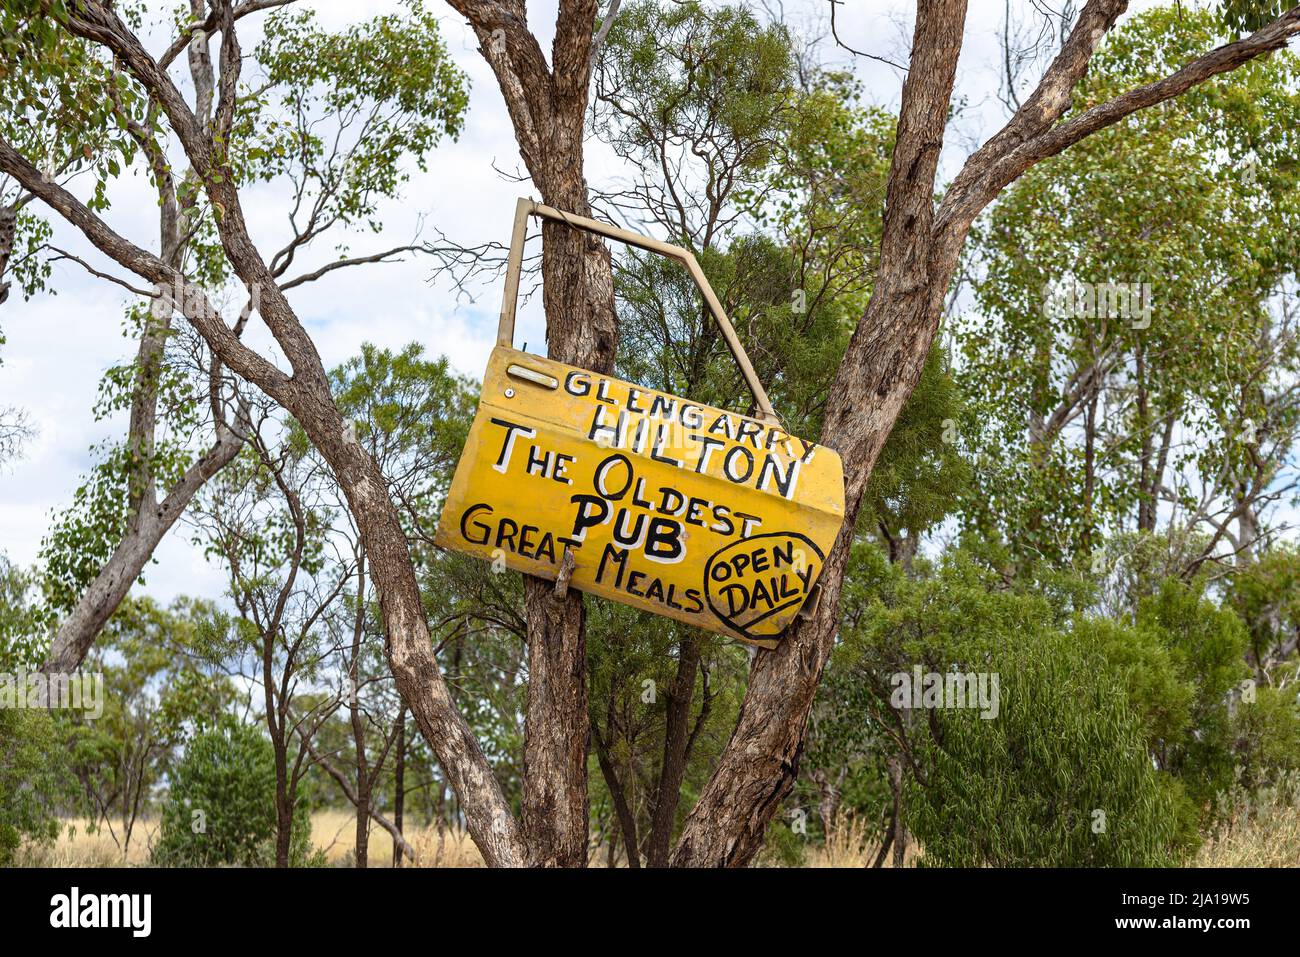 A sign for the Glengarry Hilton on the Orange Car Door Tour in the Grawin Opal Fields of New South Wales Stock Photo